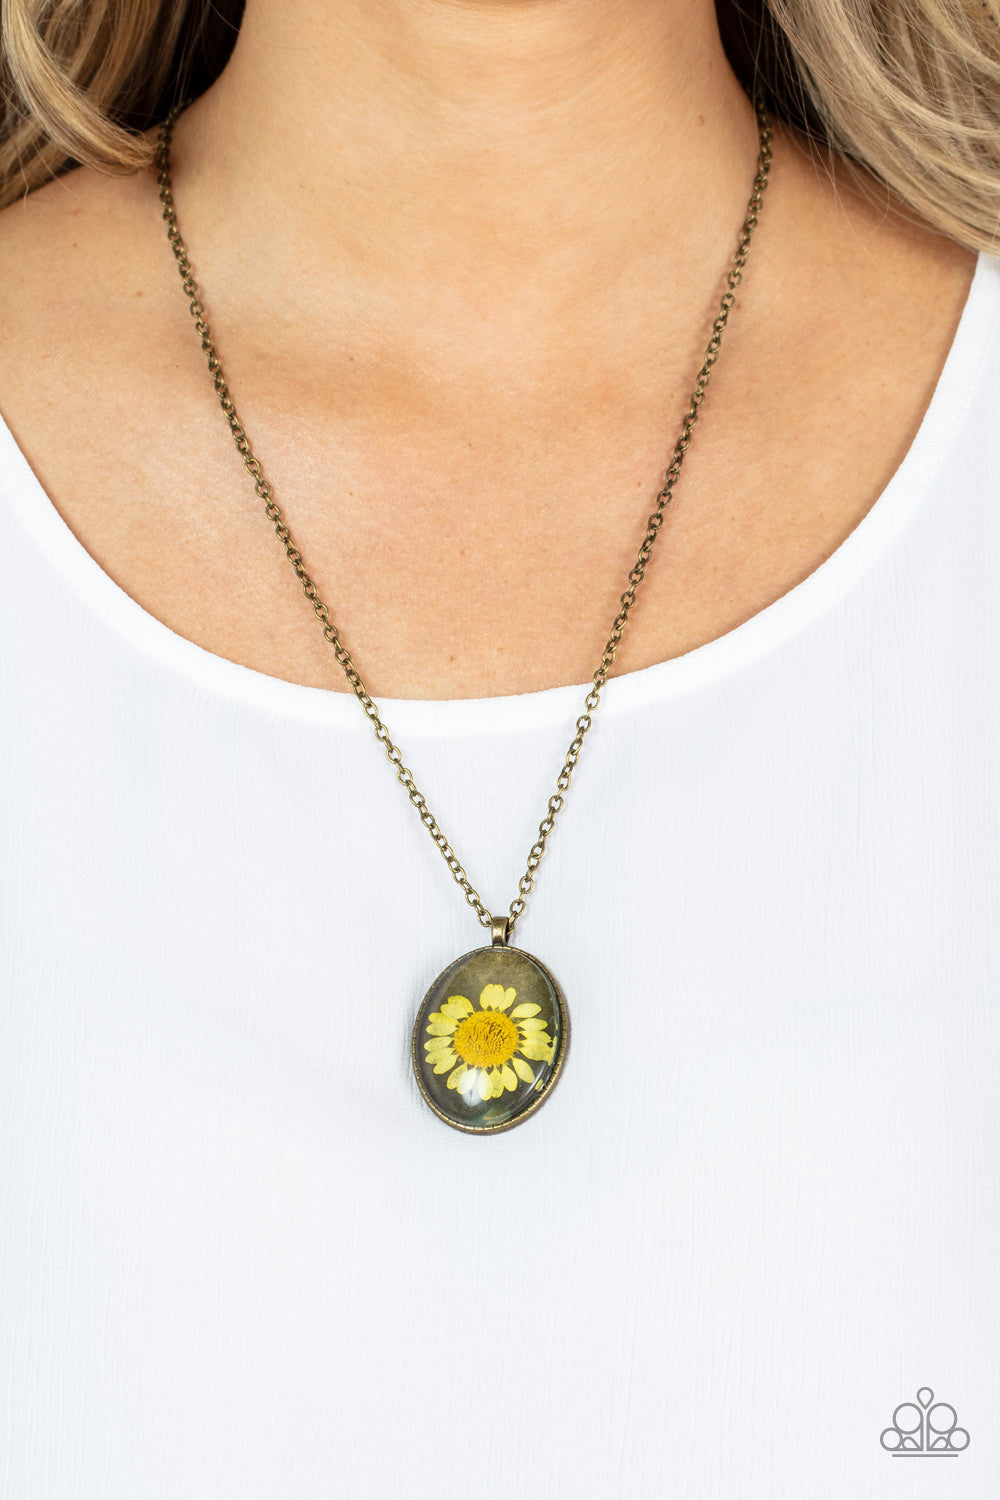 Paparazzi Accessories - Prairie Passion #N931 Peg - Yellow Necklace